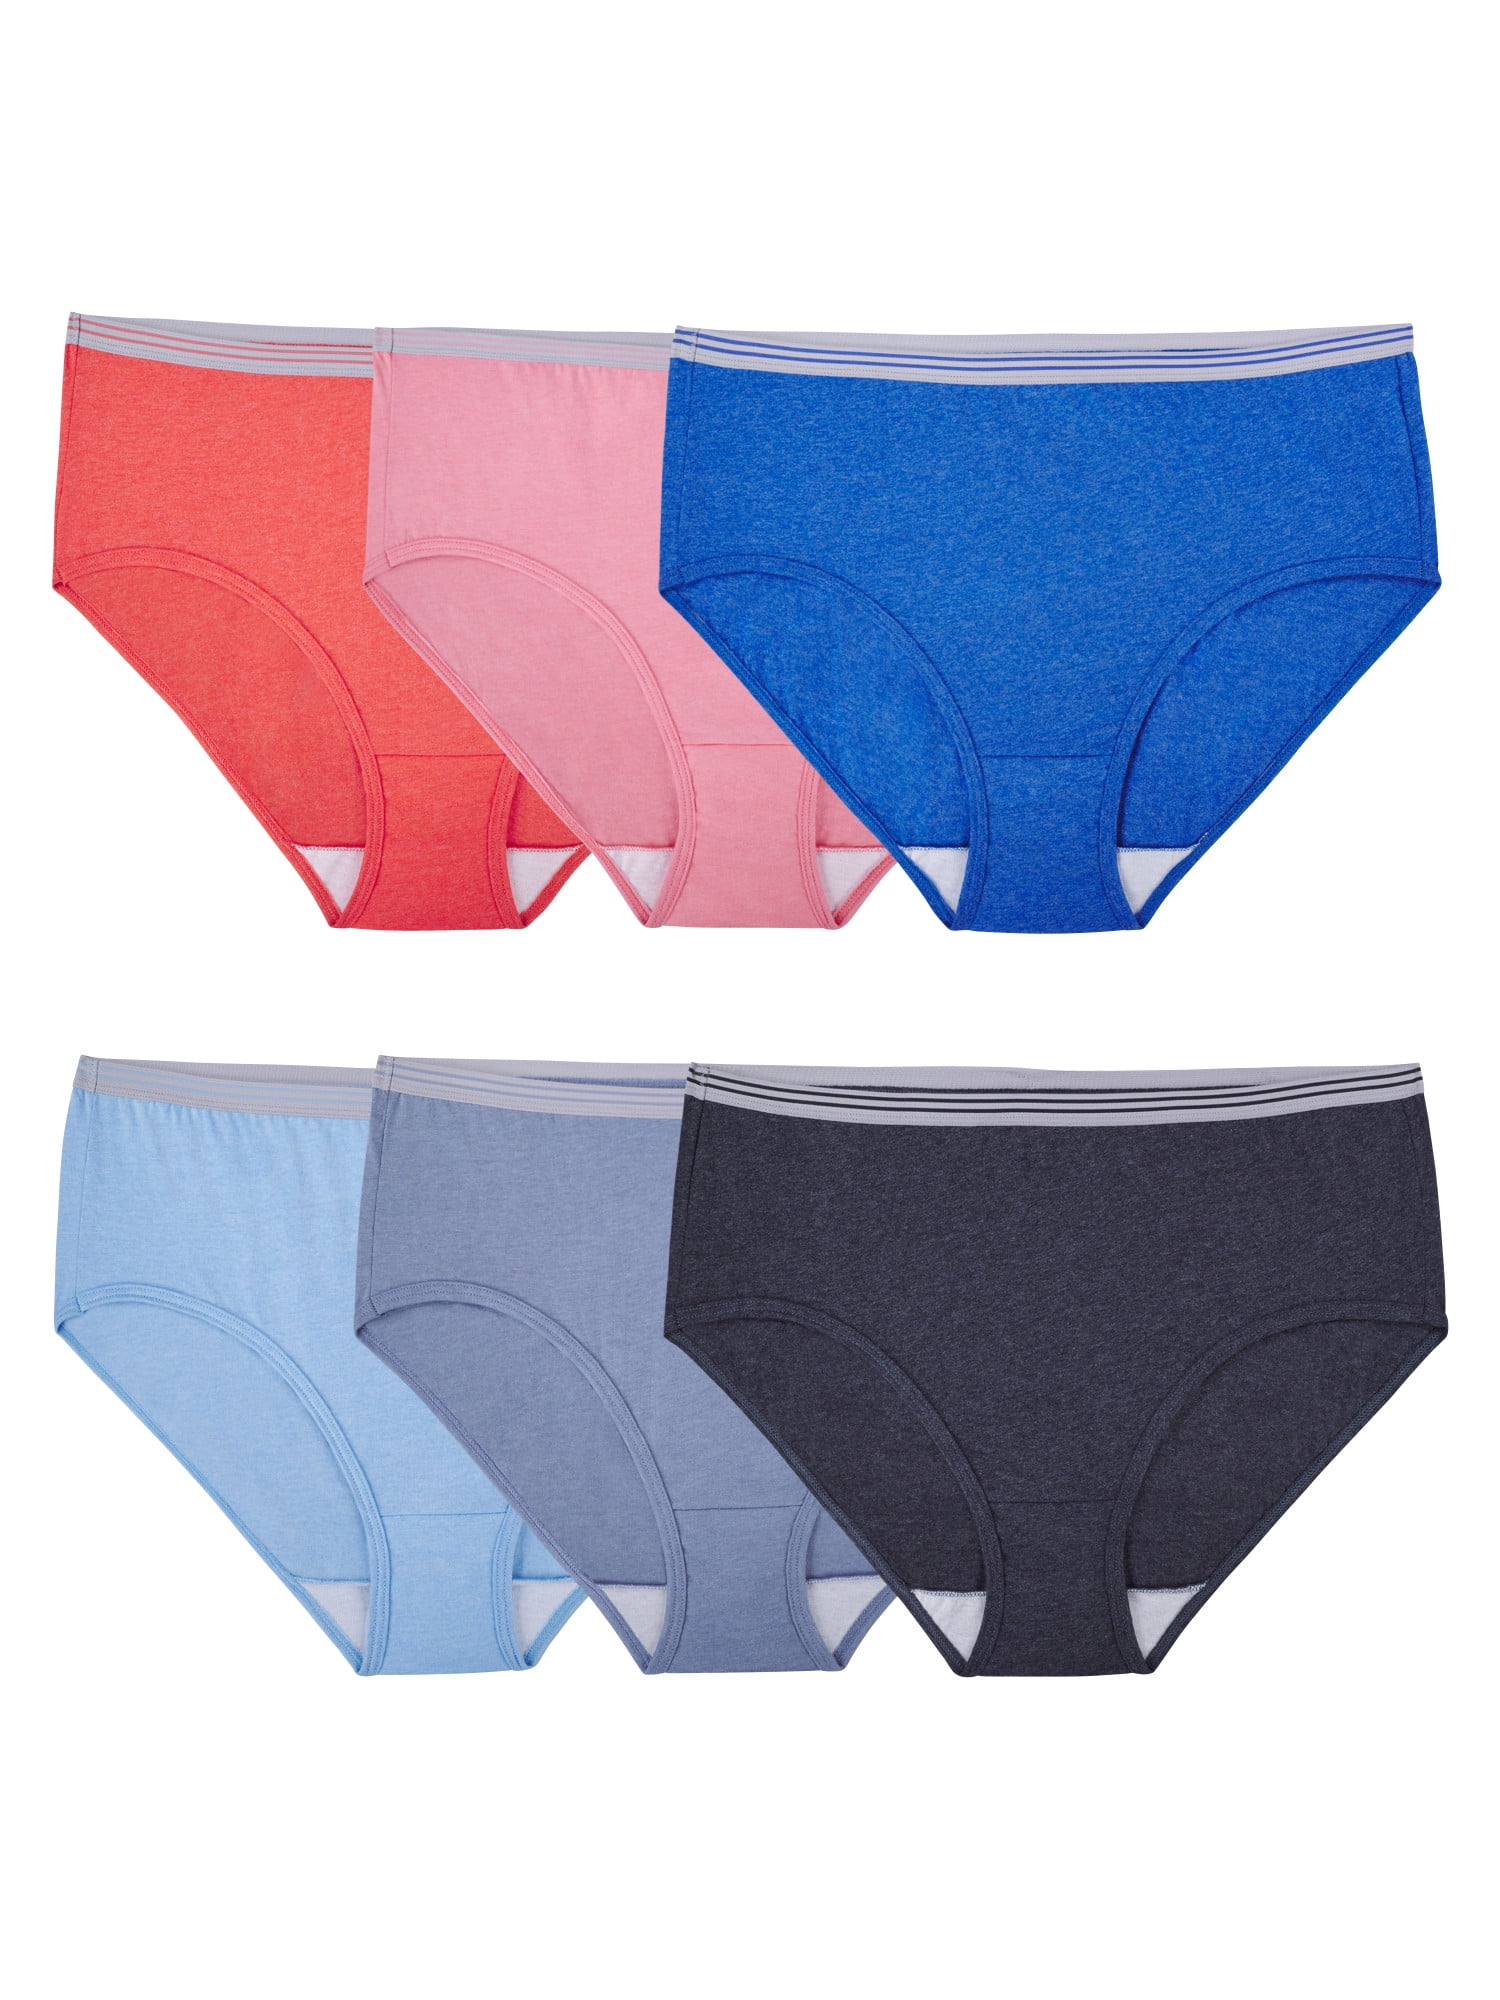  Vintage Style Target Women's Underwear Low Rise Stretch Panties  Breathable Briefs Underpants : Sports & Outdoors